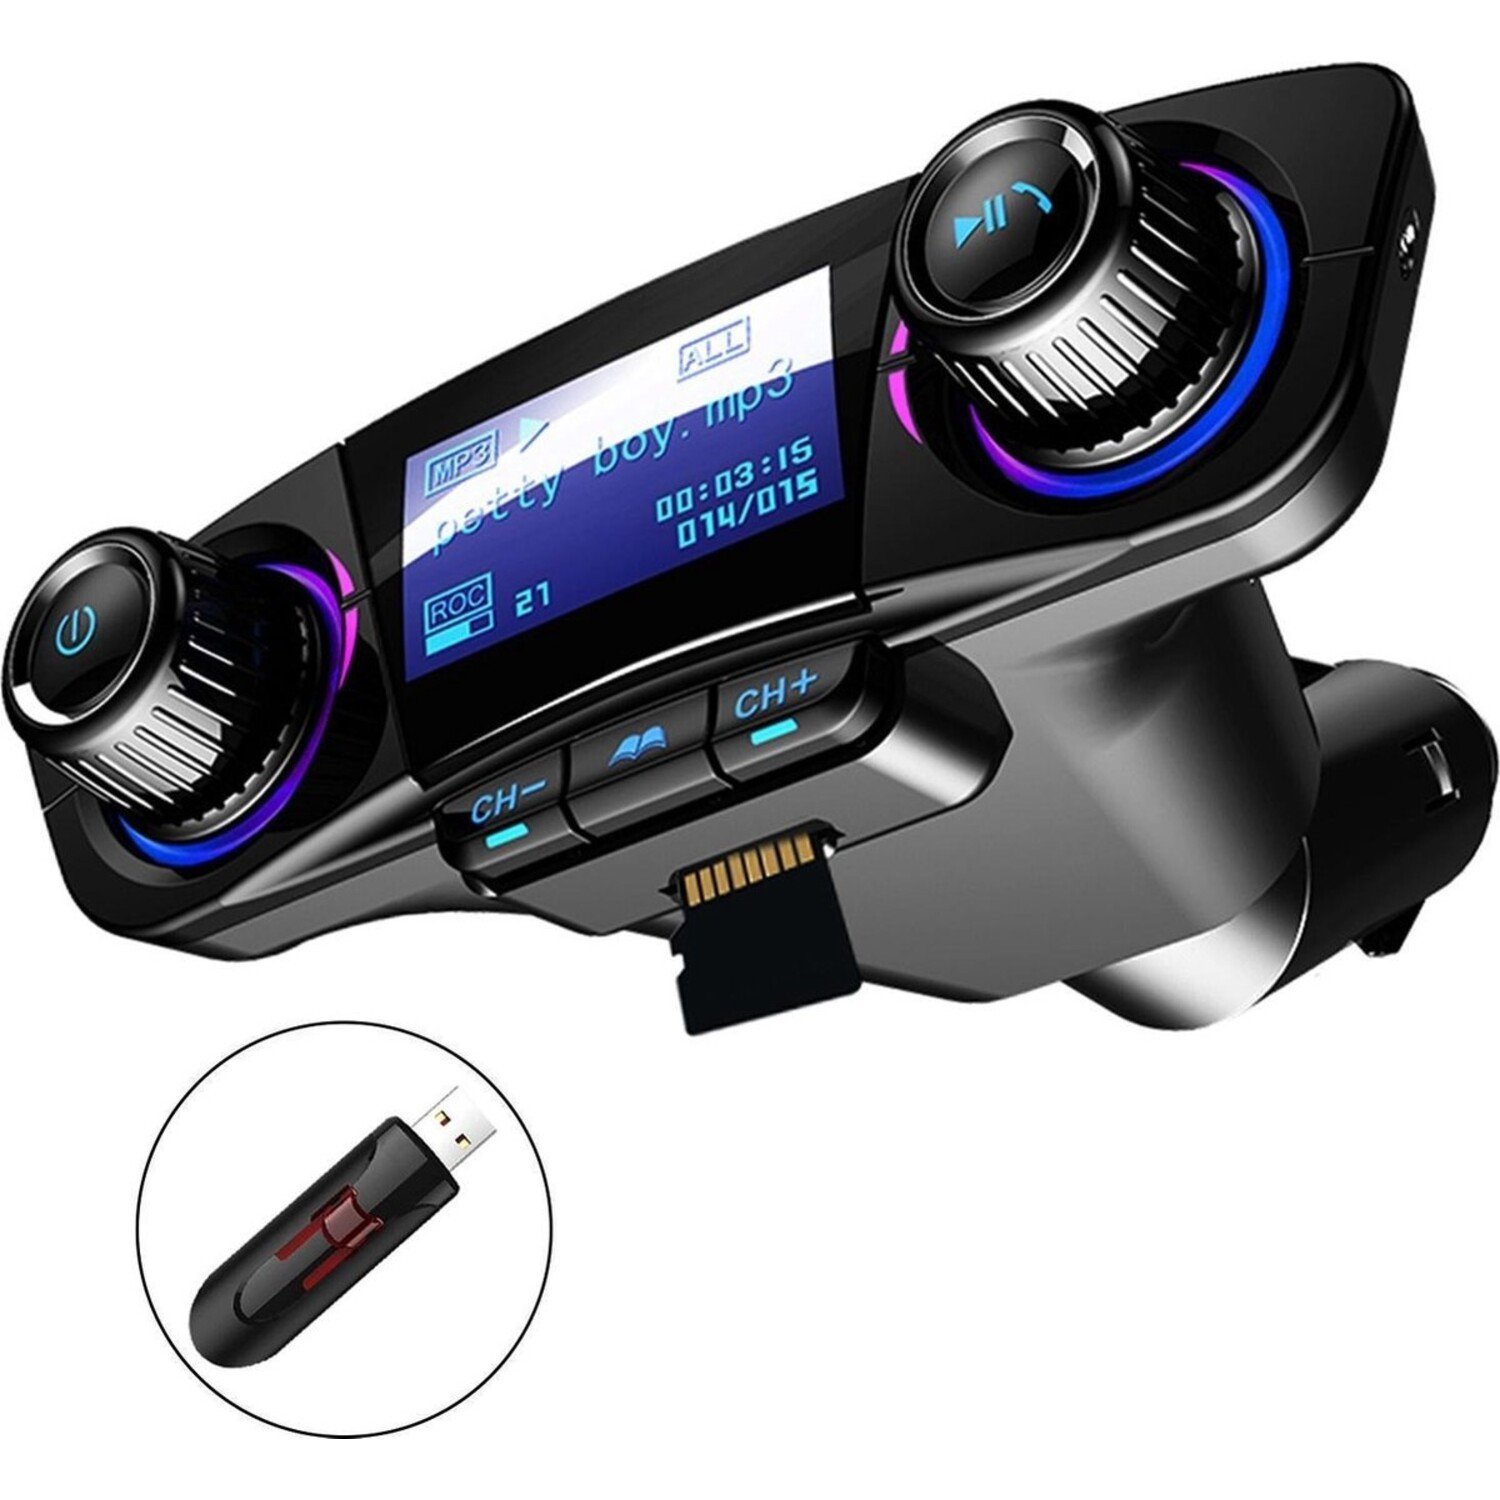 Lakro Bluetooth FM Transmitter Auto MP3-Player Handsfree Wireless Radio  Audio Adapter met Dual USB USB Disk/SD Kaart AUX-ingang uitgang - Lakro  Autostyling en Audio